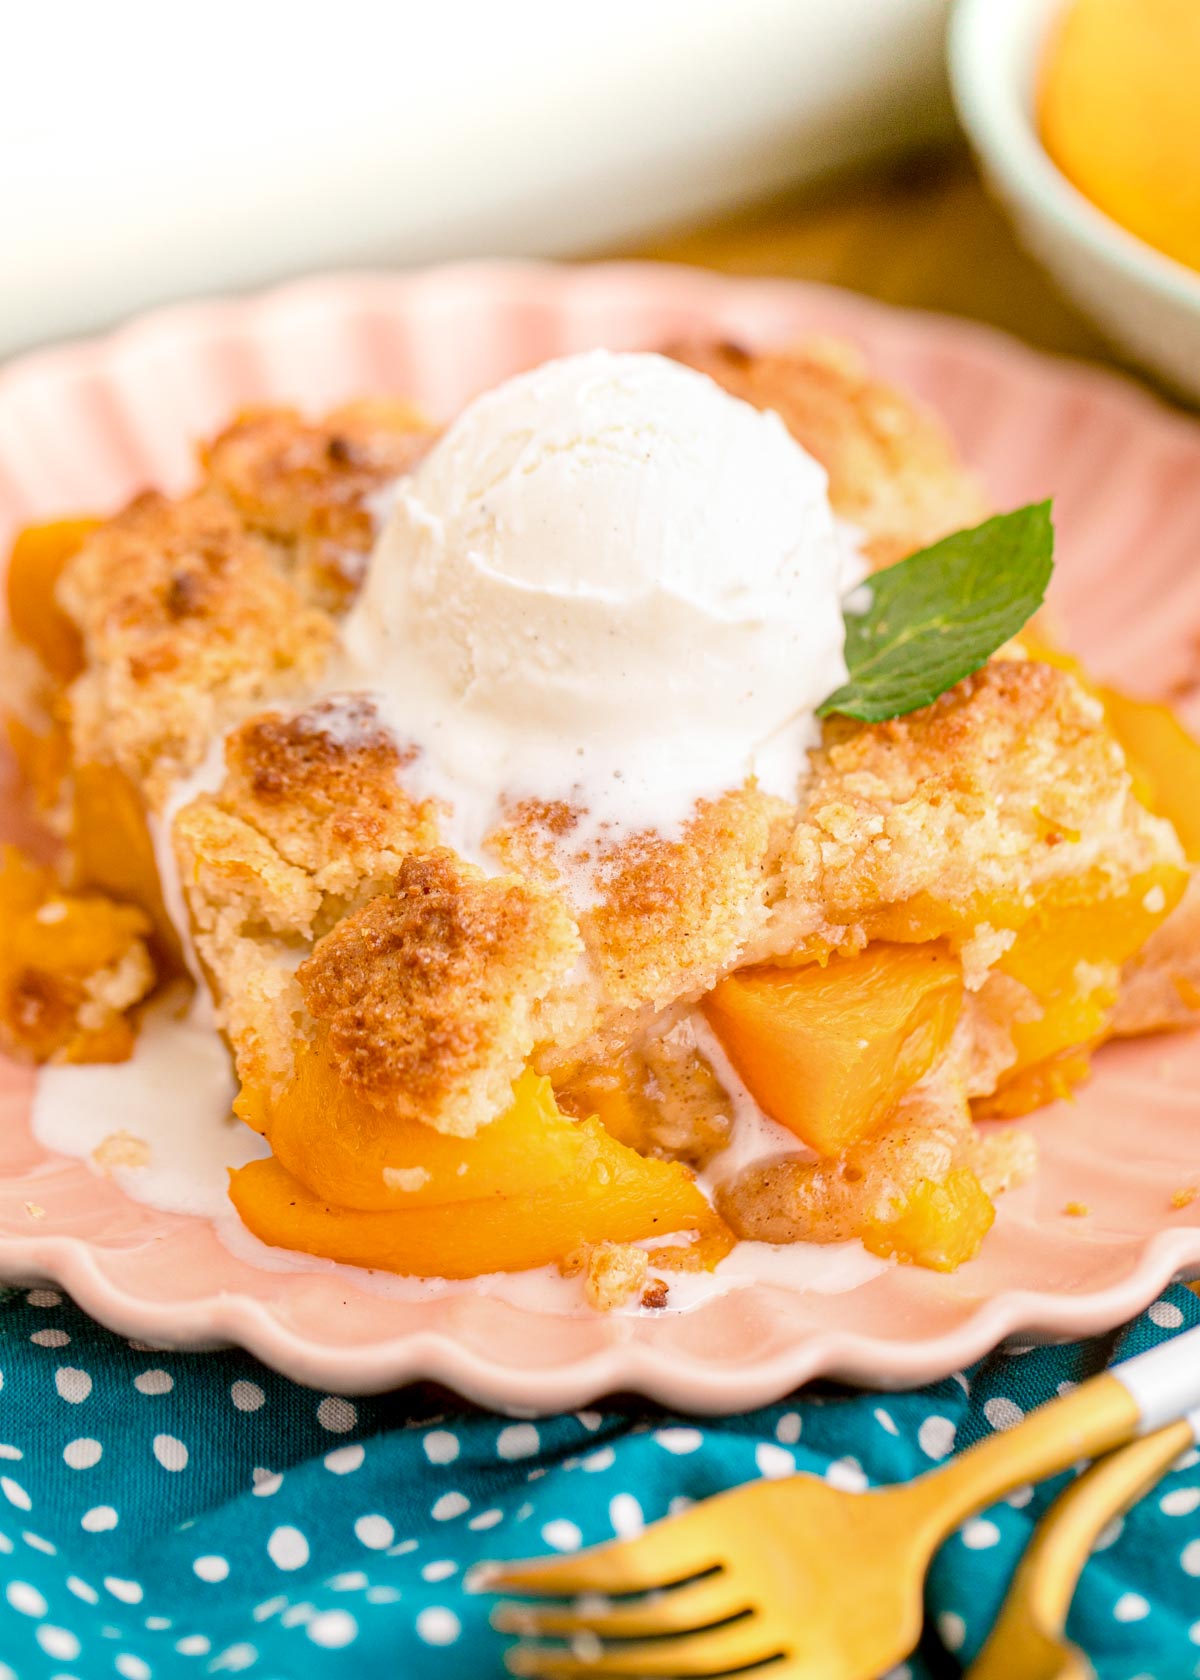 Close up photo of a slice of peach cobbler on a pink plate on a blue napkin.